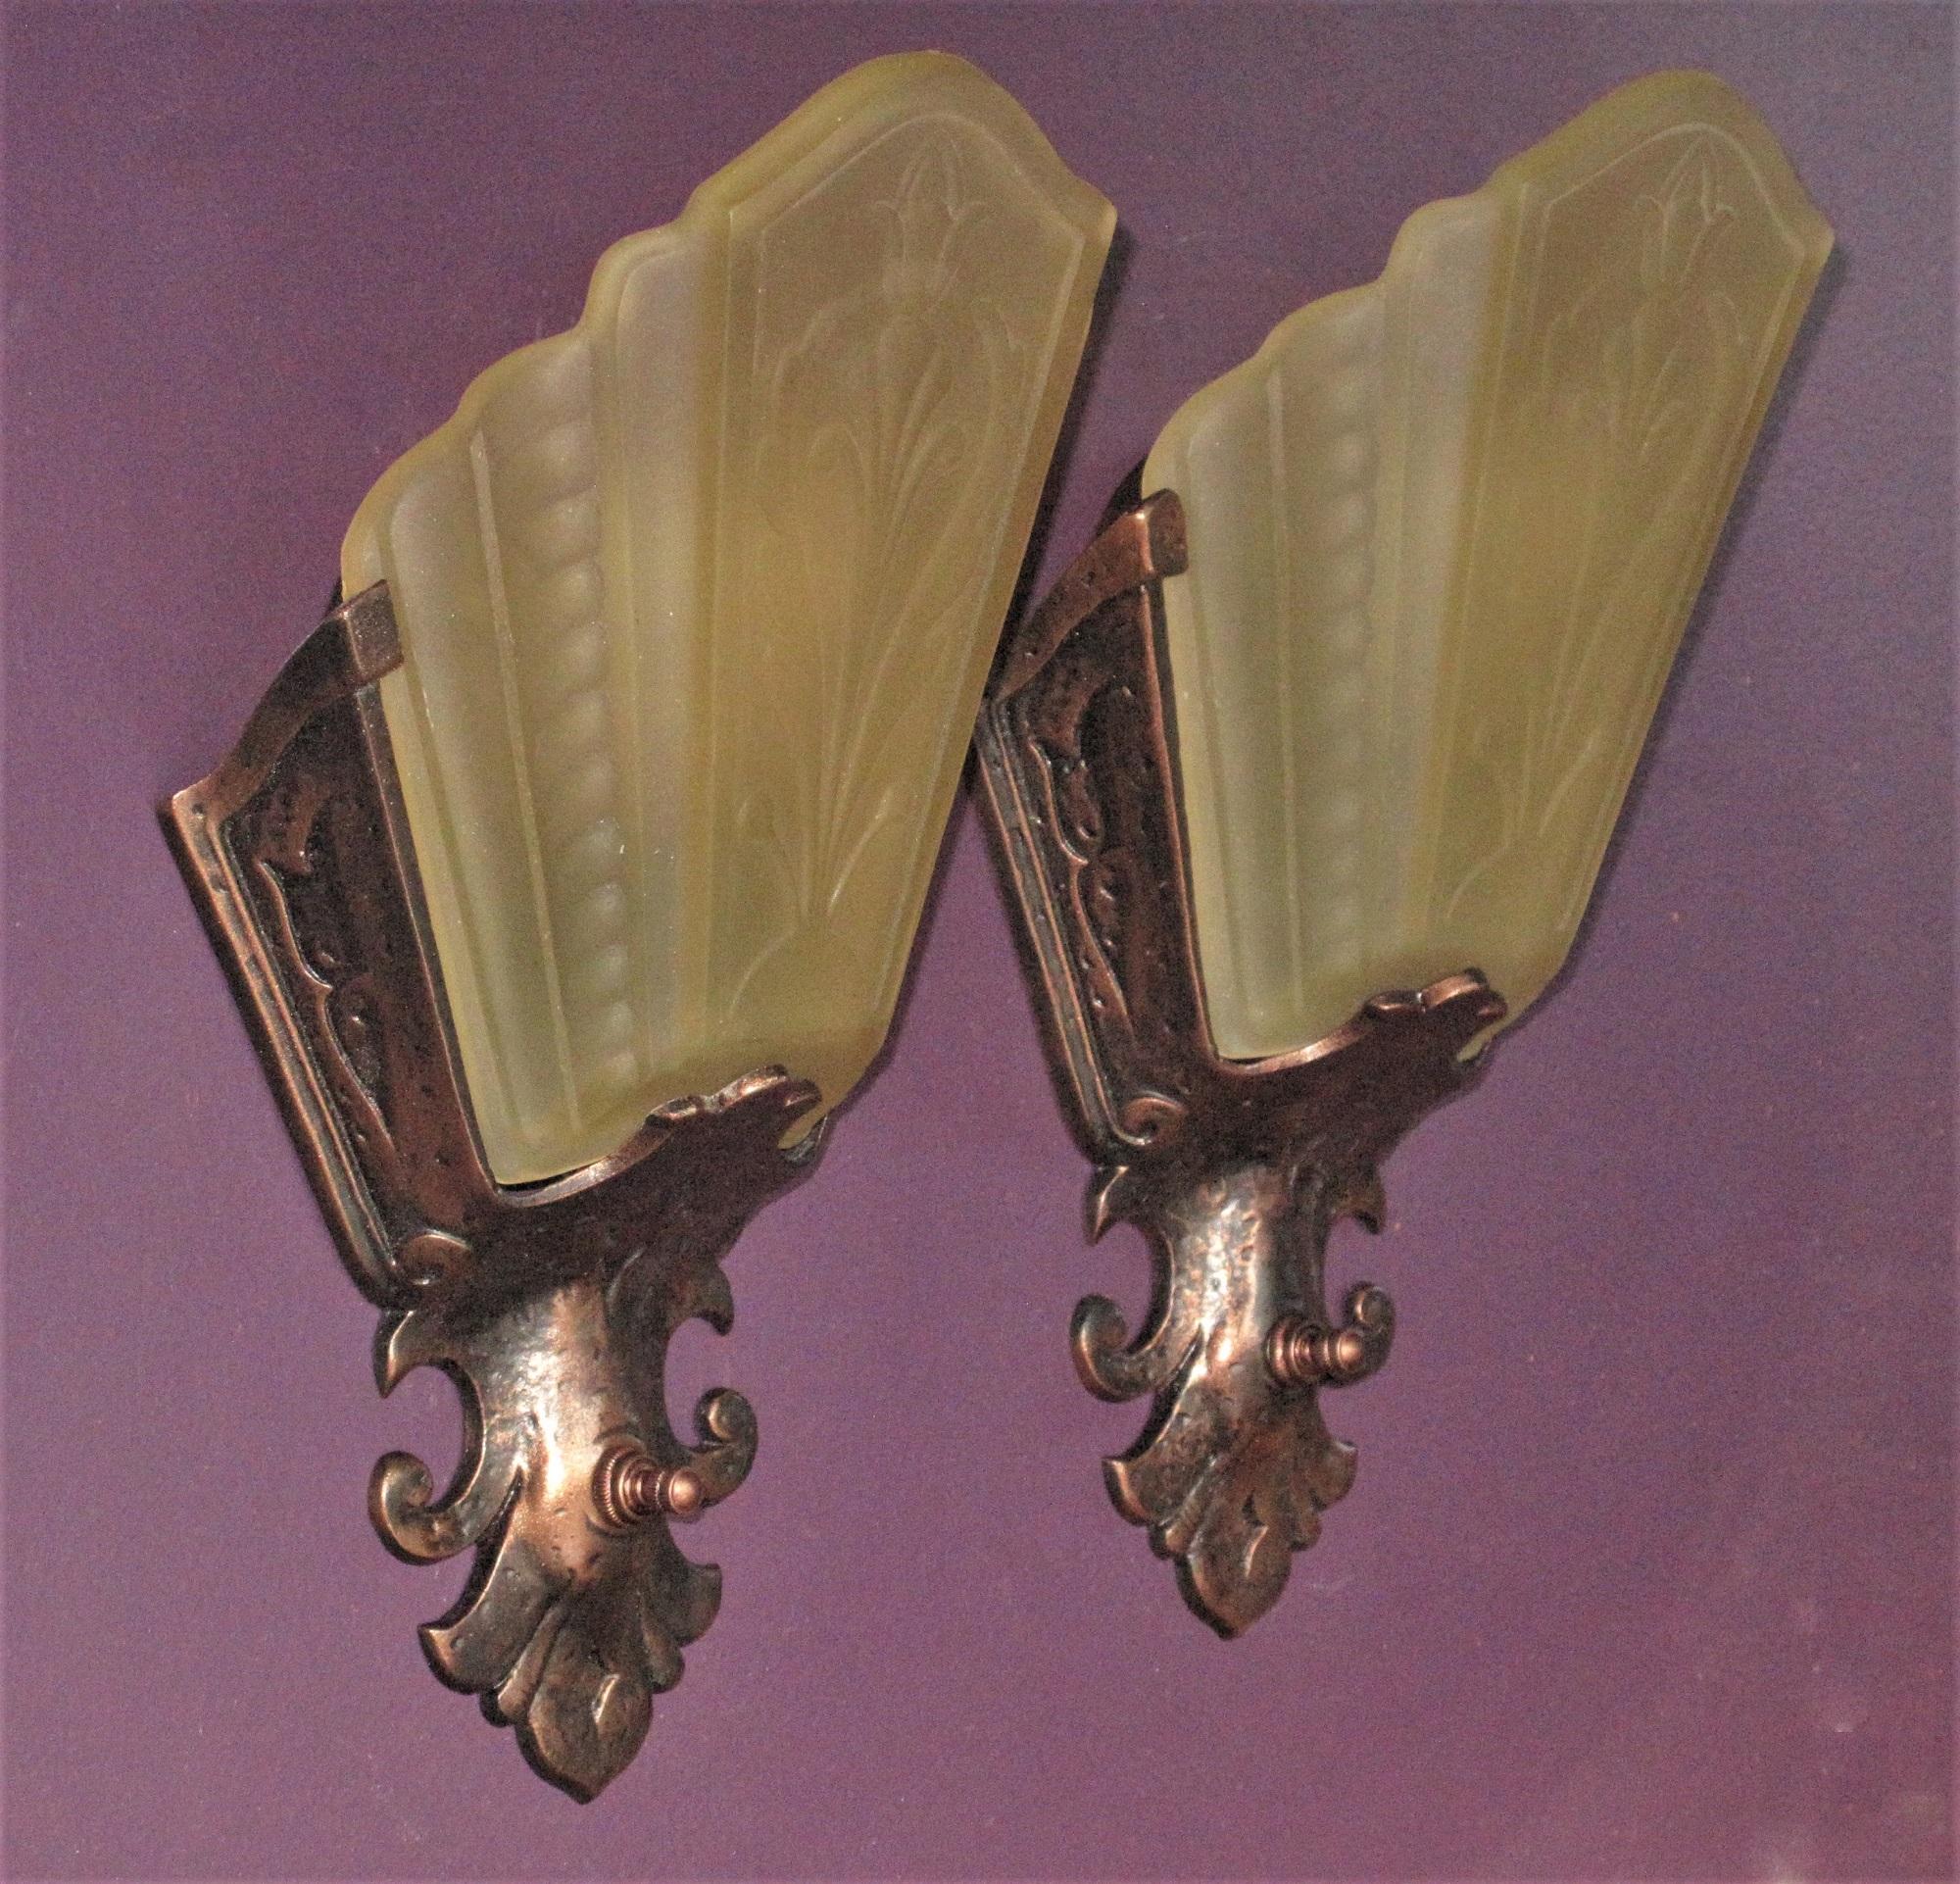 American Craftsman 3 Art Deco / Revival Slip Shade Sconces 1930s Priced per pair For Sale